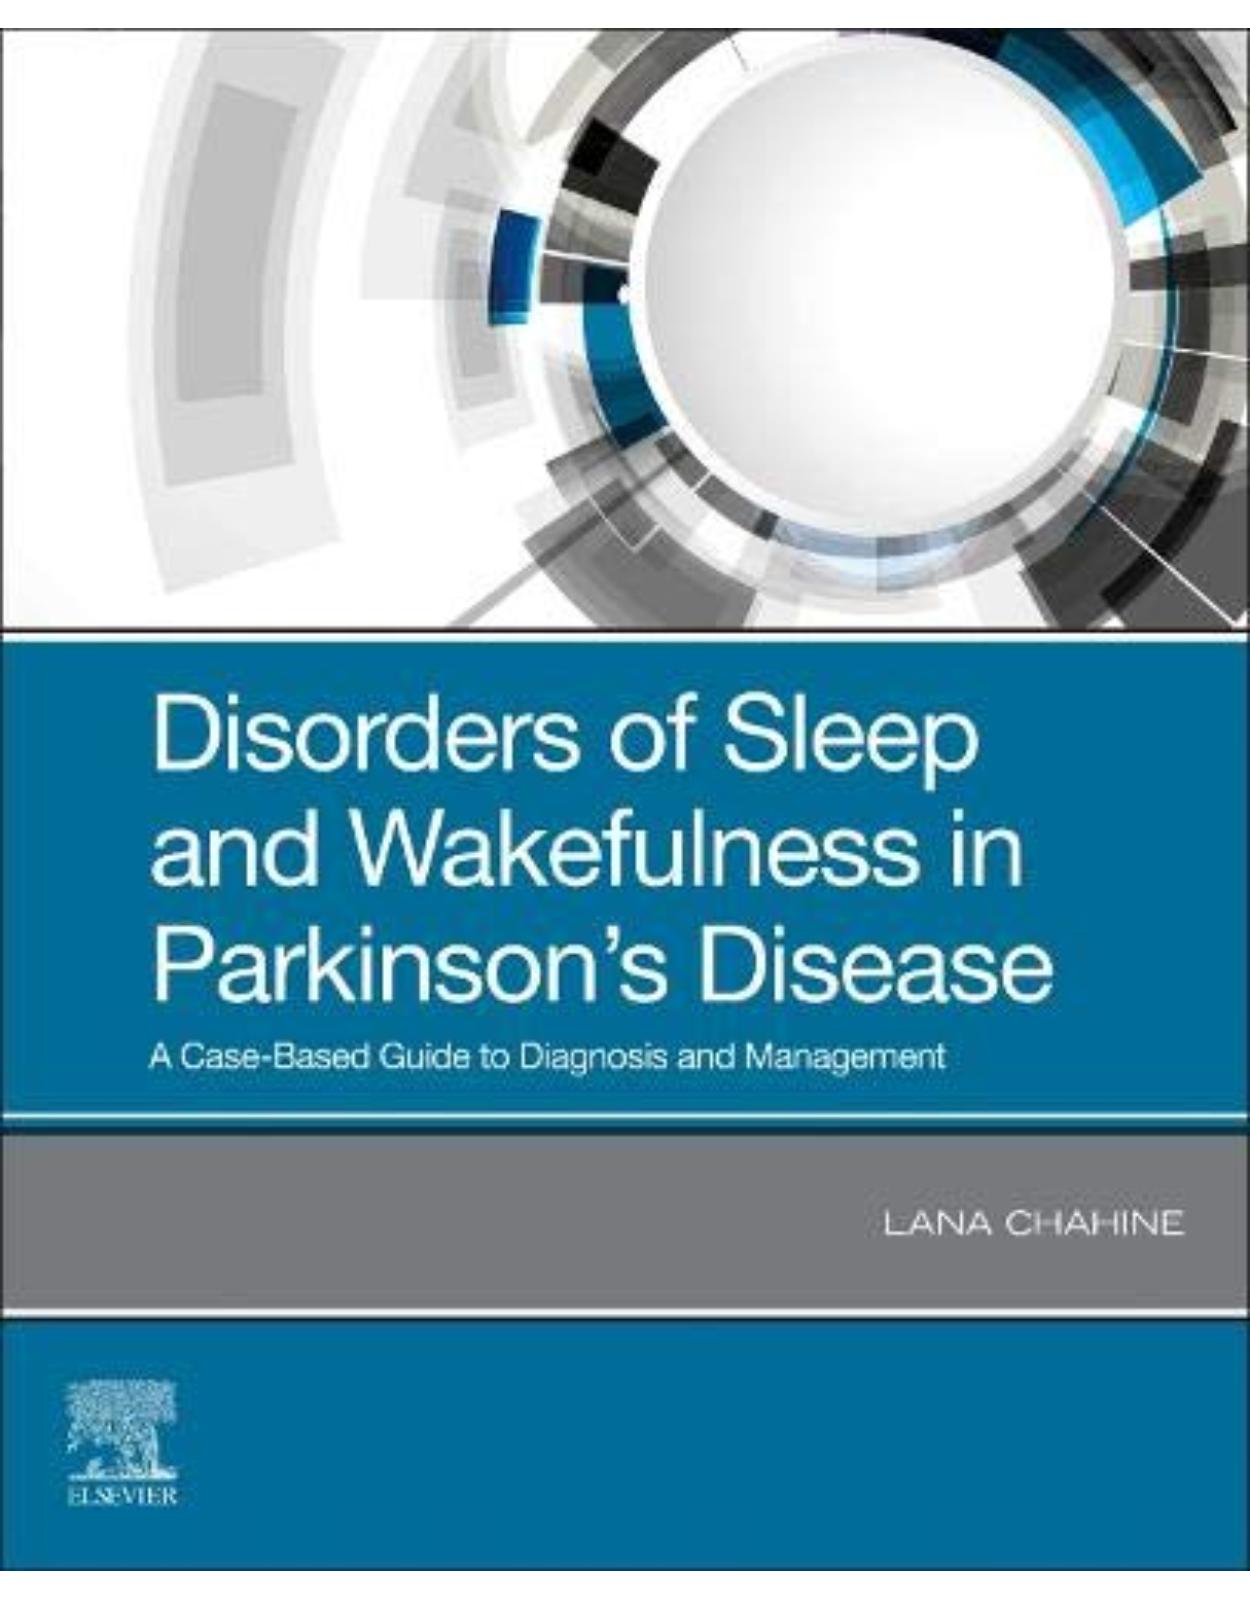 Disorders of Sleep and Wakefulness in Parkinson's Disease, A Case-Based Guide to Diagnosis and Management